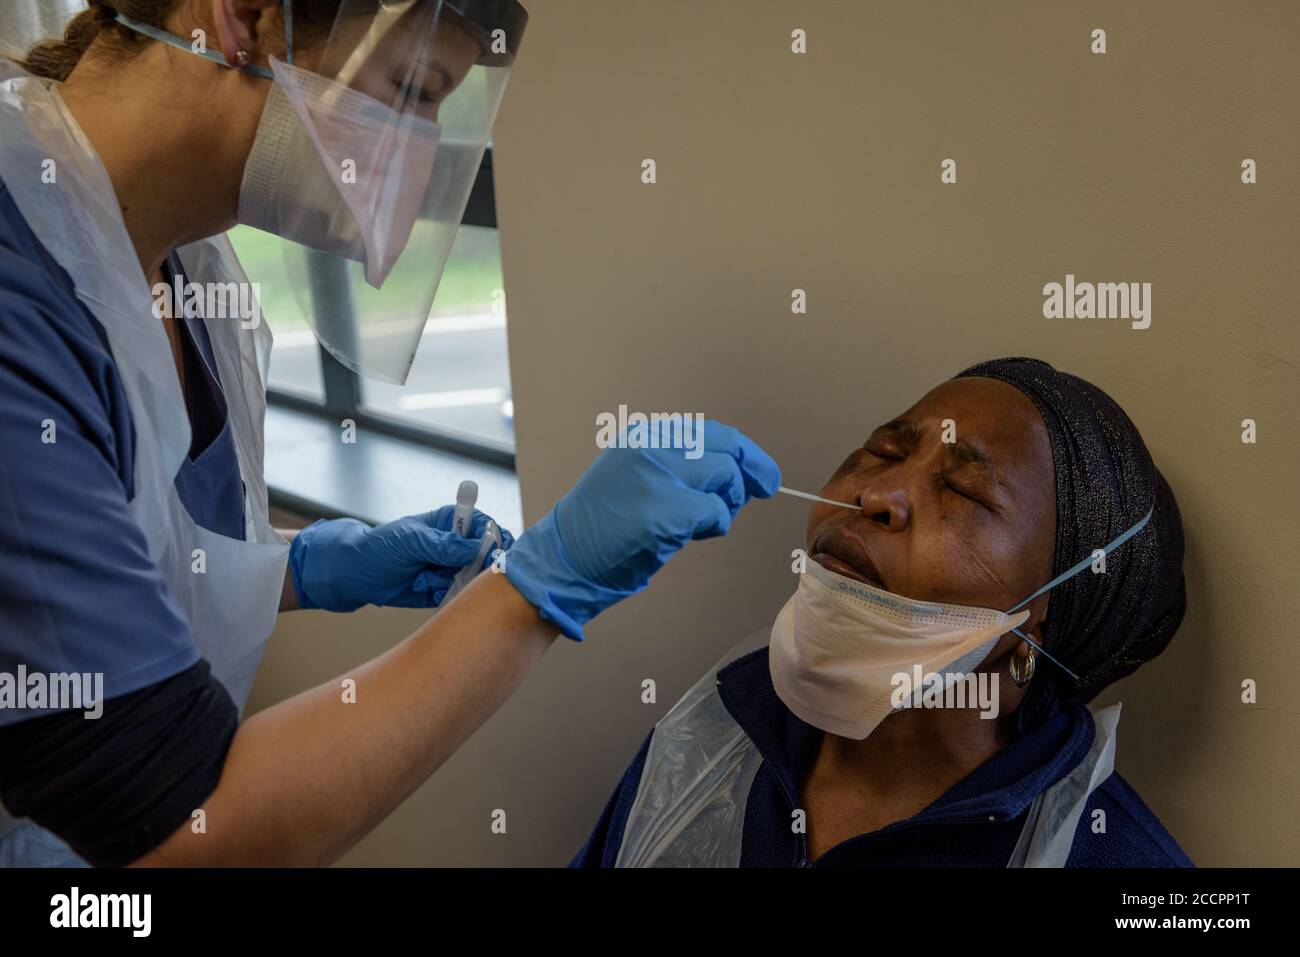 A volunteer for the Oxford vaccine trial at Cape Town's Groote Schuur Hospital is tested for COVID-19 using a nasal swab to detect the virus Stock Photo